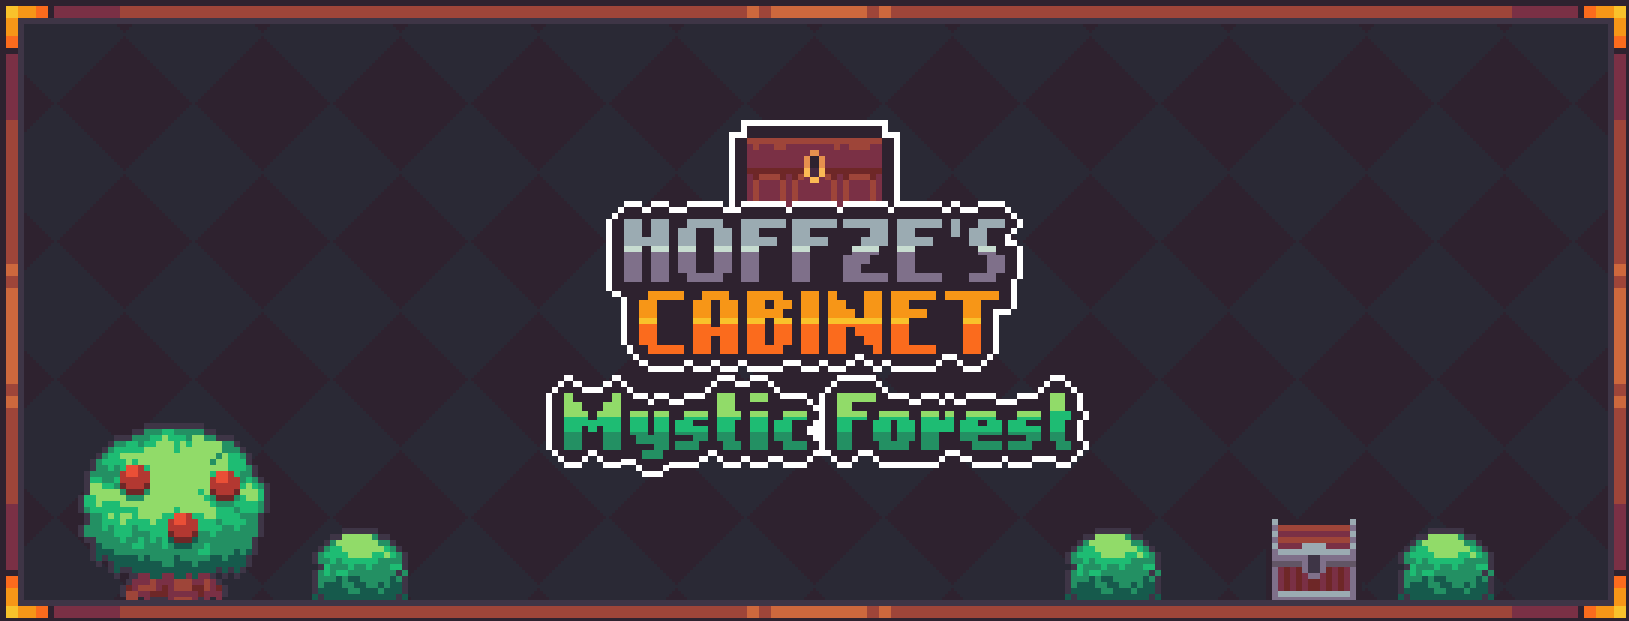 Hoffze's Cabinet - Mystic Forest